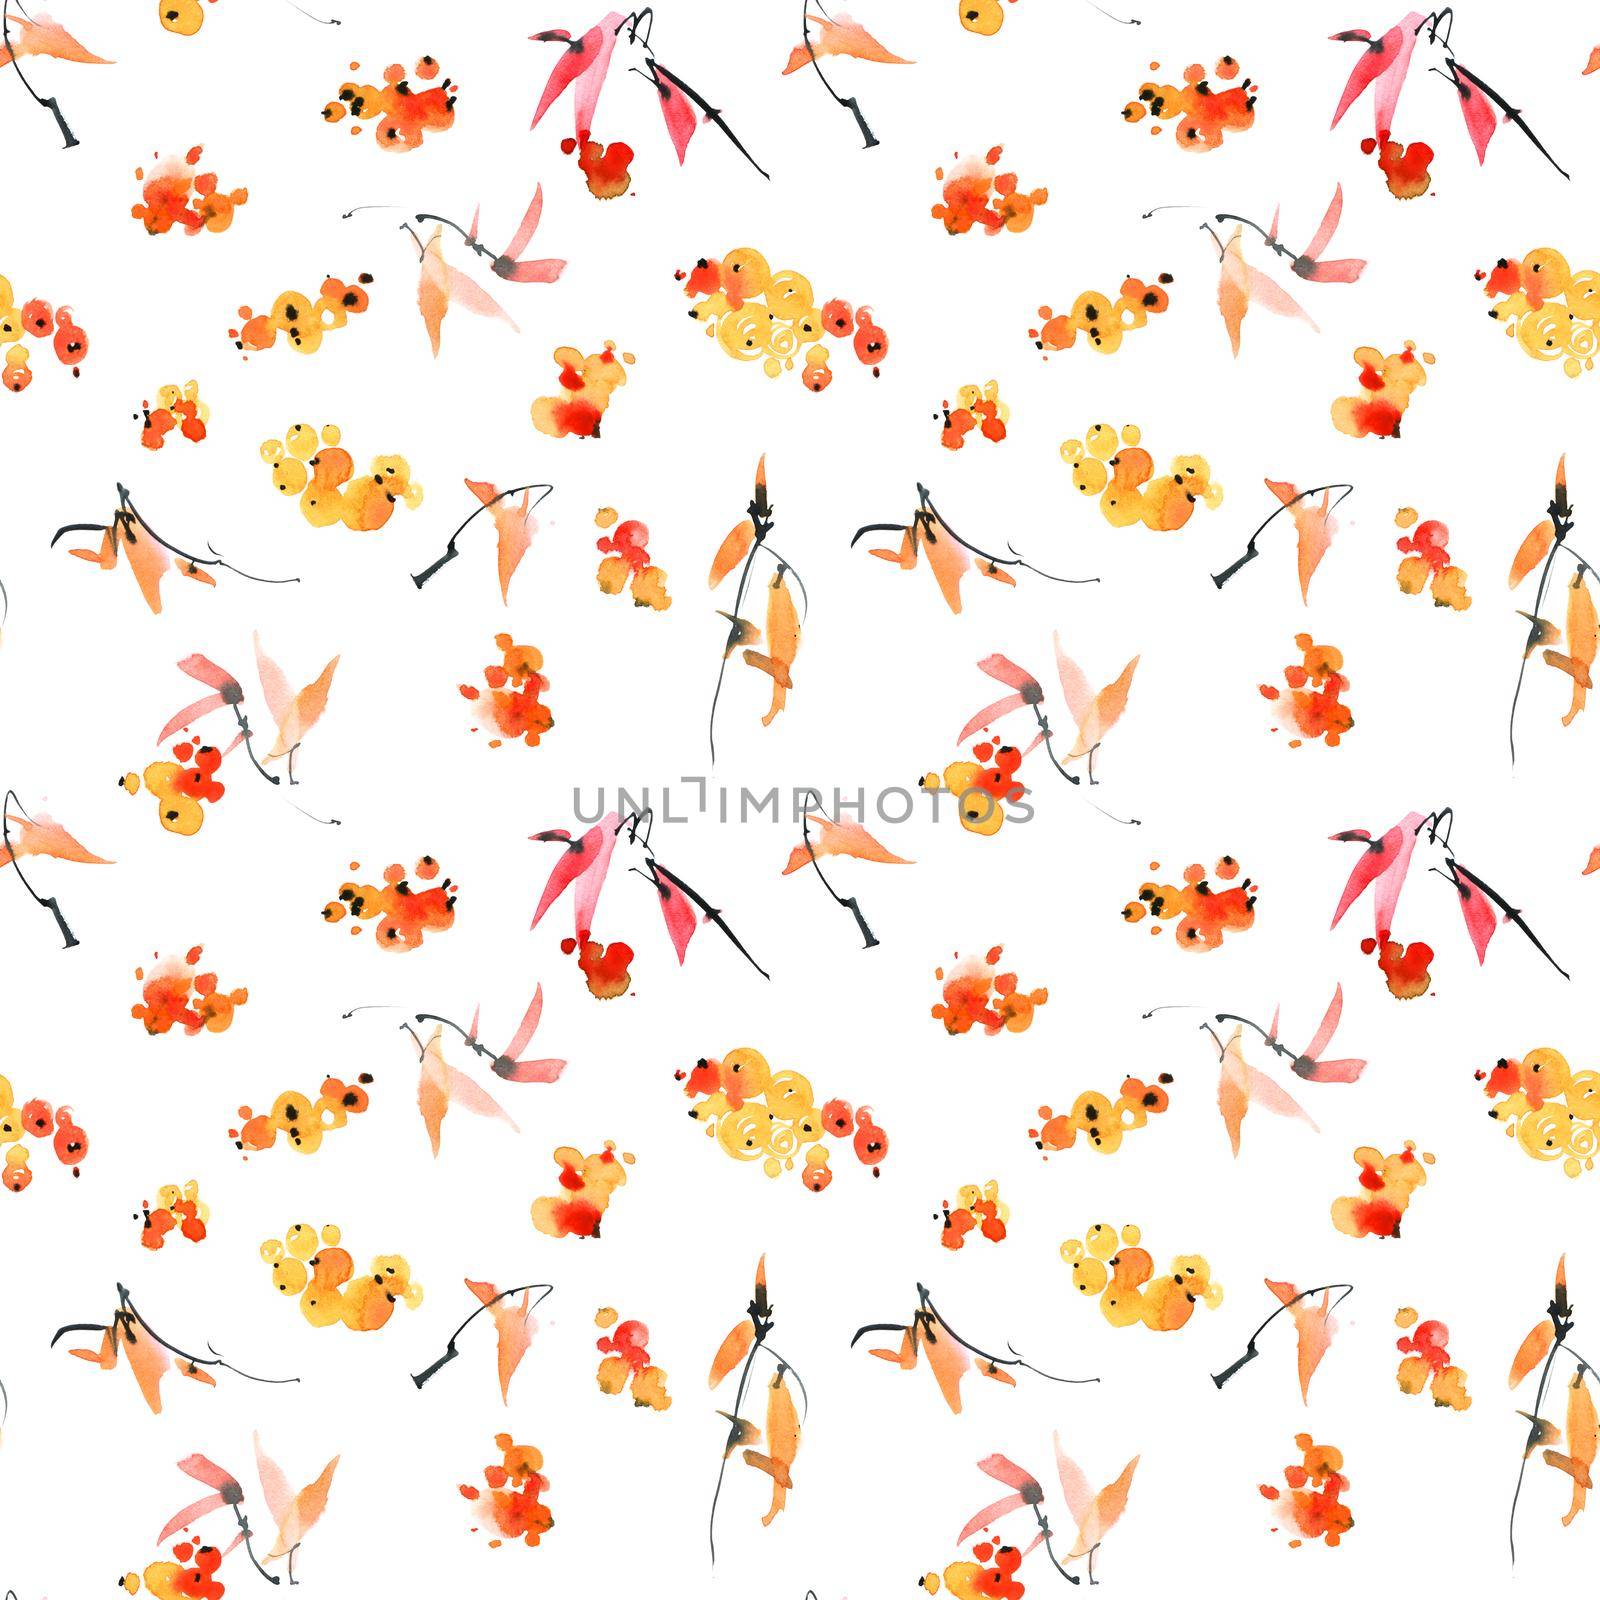 Watercolor seamless pattern - grassy plants with leaves and berries. Sumi-e art.